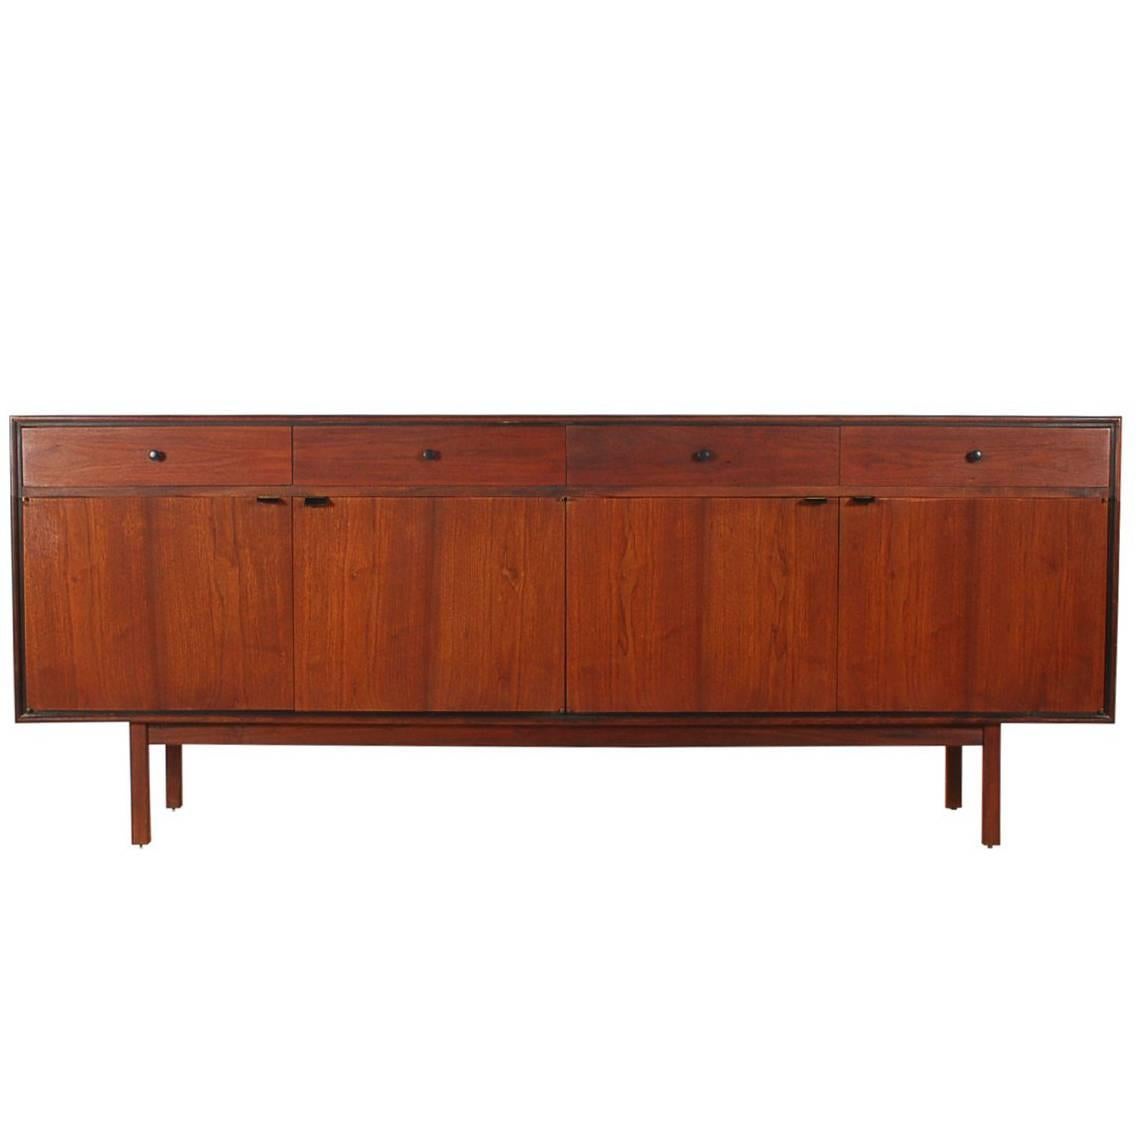 Mid-Century Modern Walnut Cabinet or Credenza Attributed to Florence Knoll